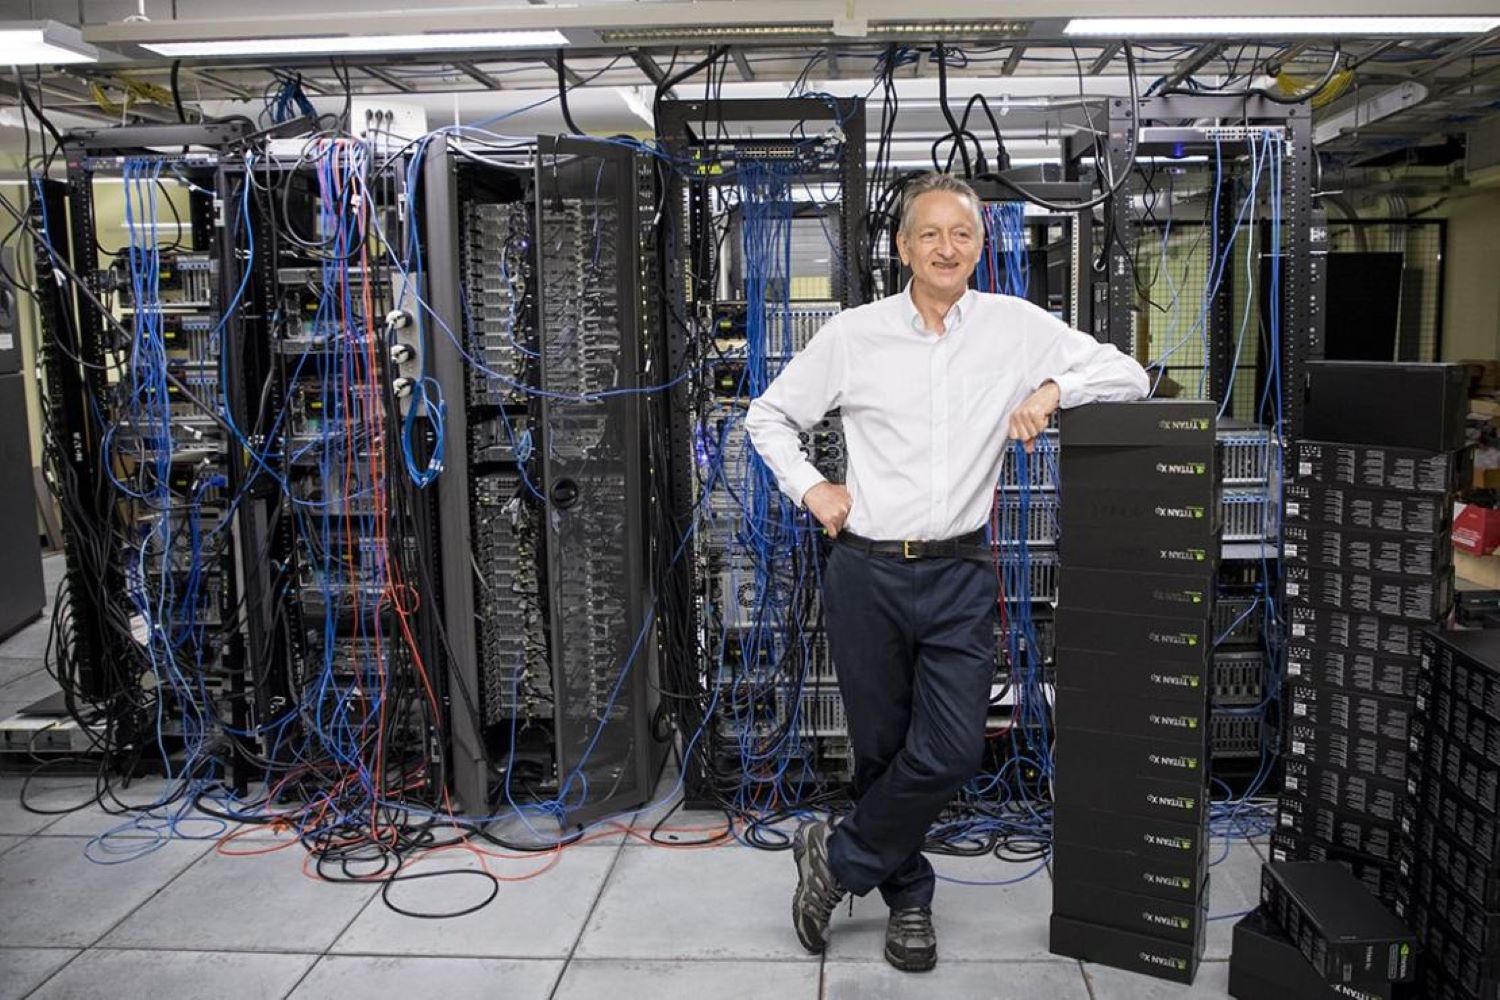 Geoffrey Hinton strikes a relaxed pose in the server room of the machine learning group